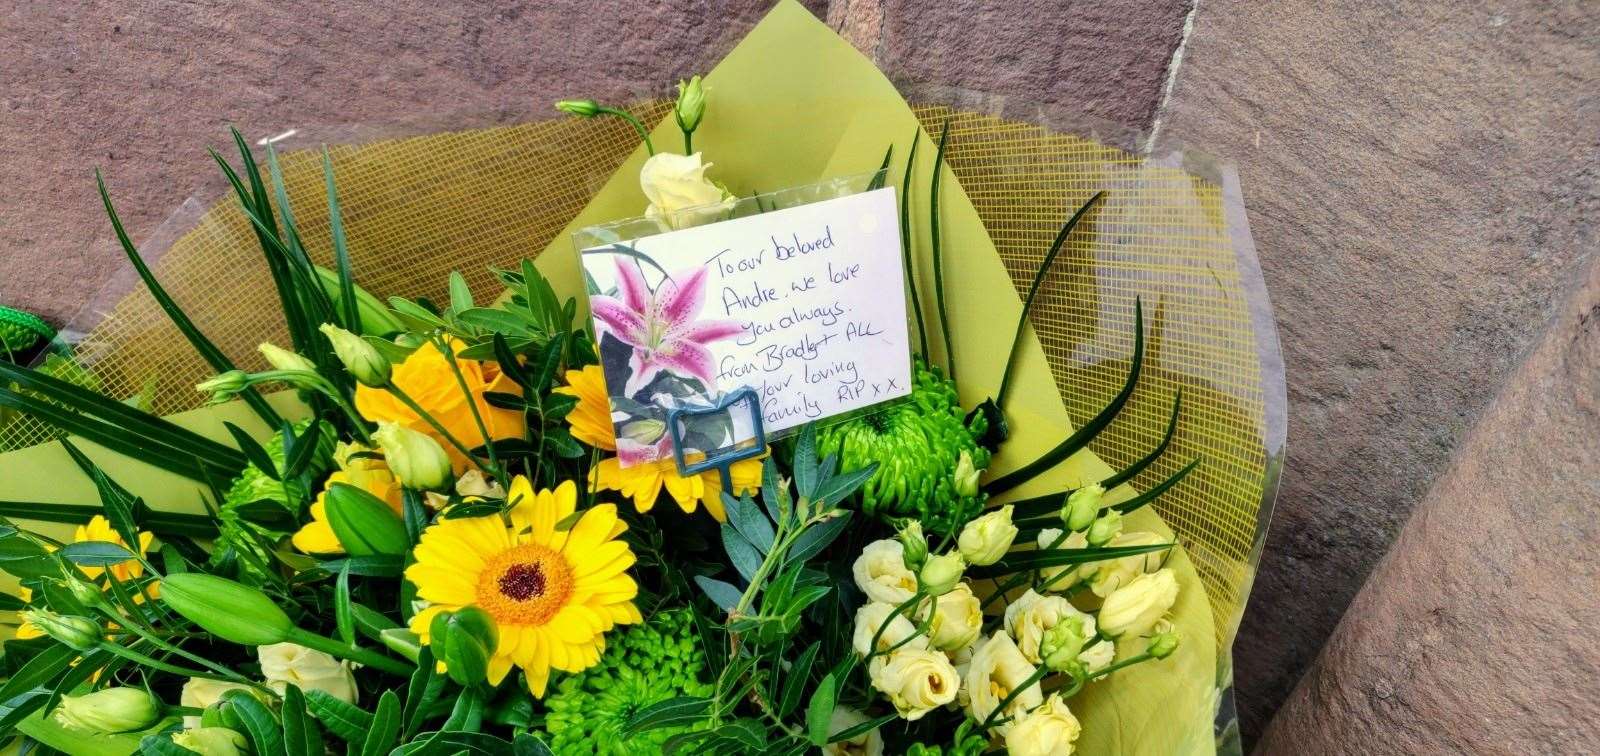 A floral tribute to Andre Bent left in Maidstone on the first anniversary of his death on behalf of his cousin Bradley McIntosh